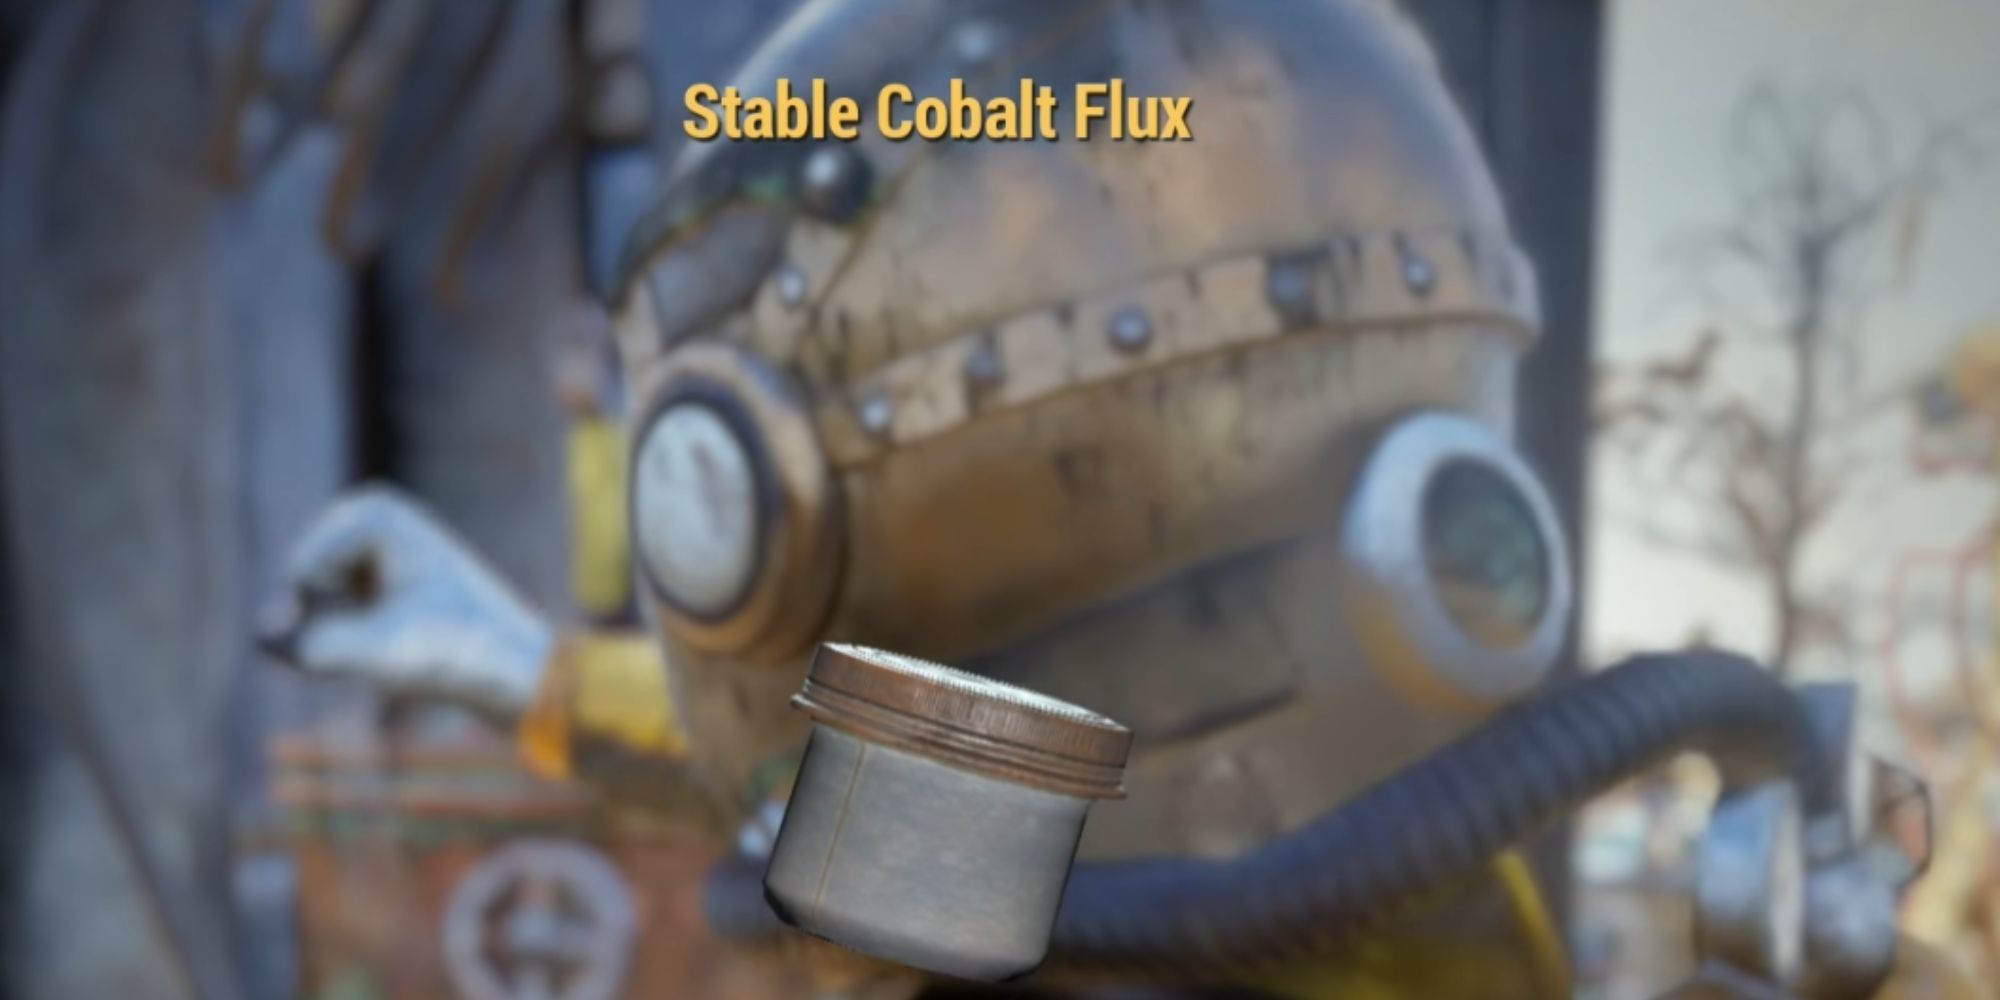 fallout_76_stable_cobalt_flux_item_in_chemistry_station